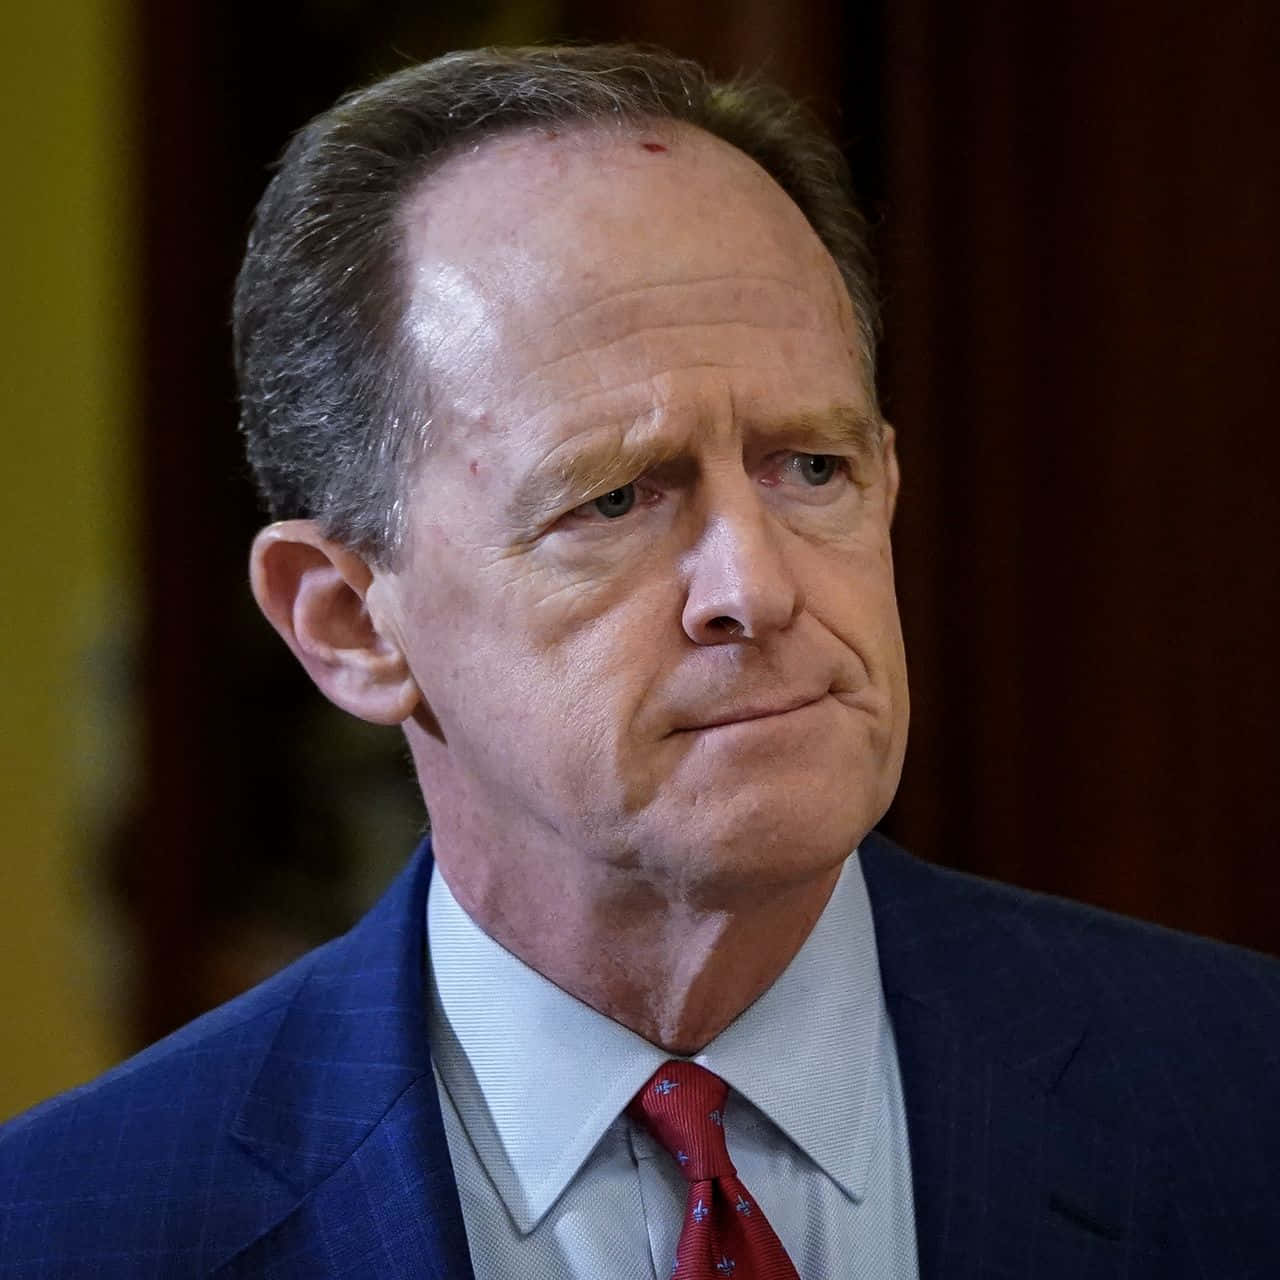 Pat Toomey With Frown Picture